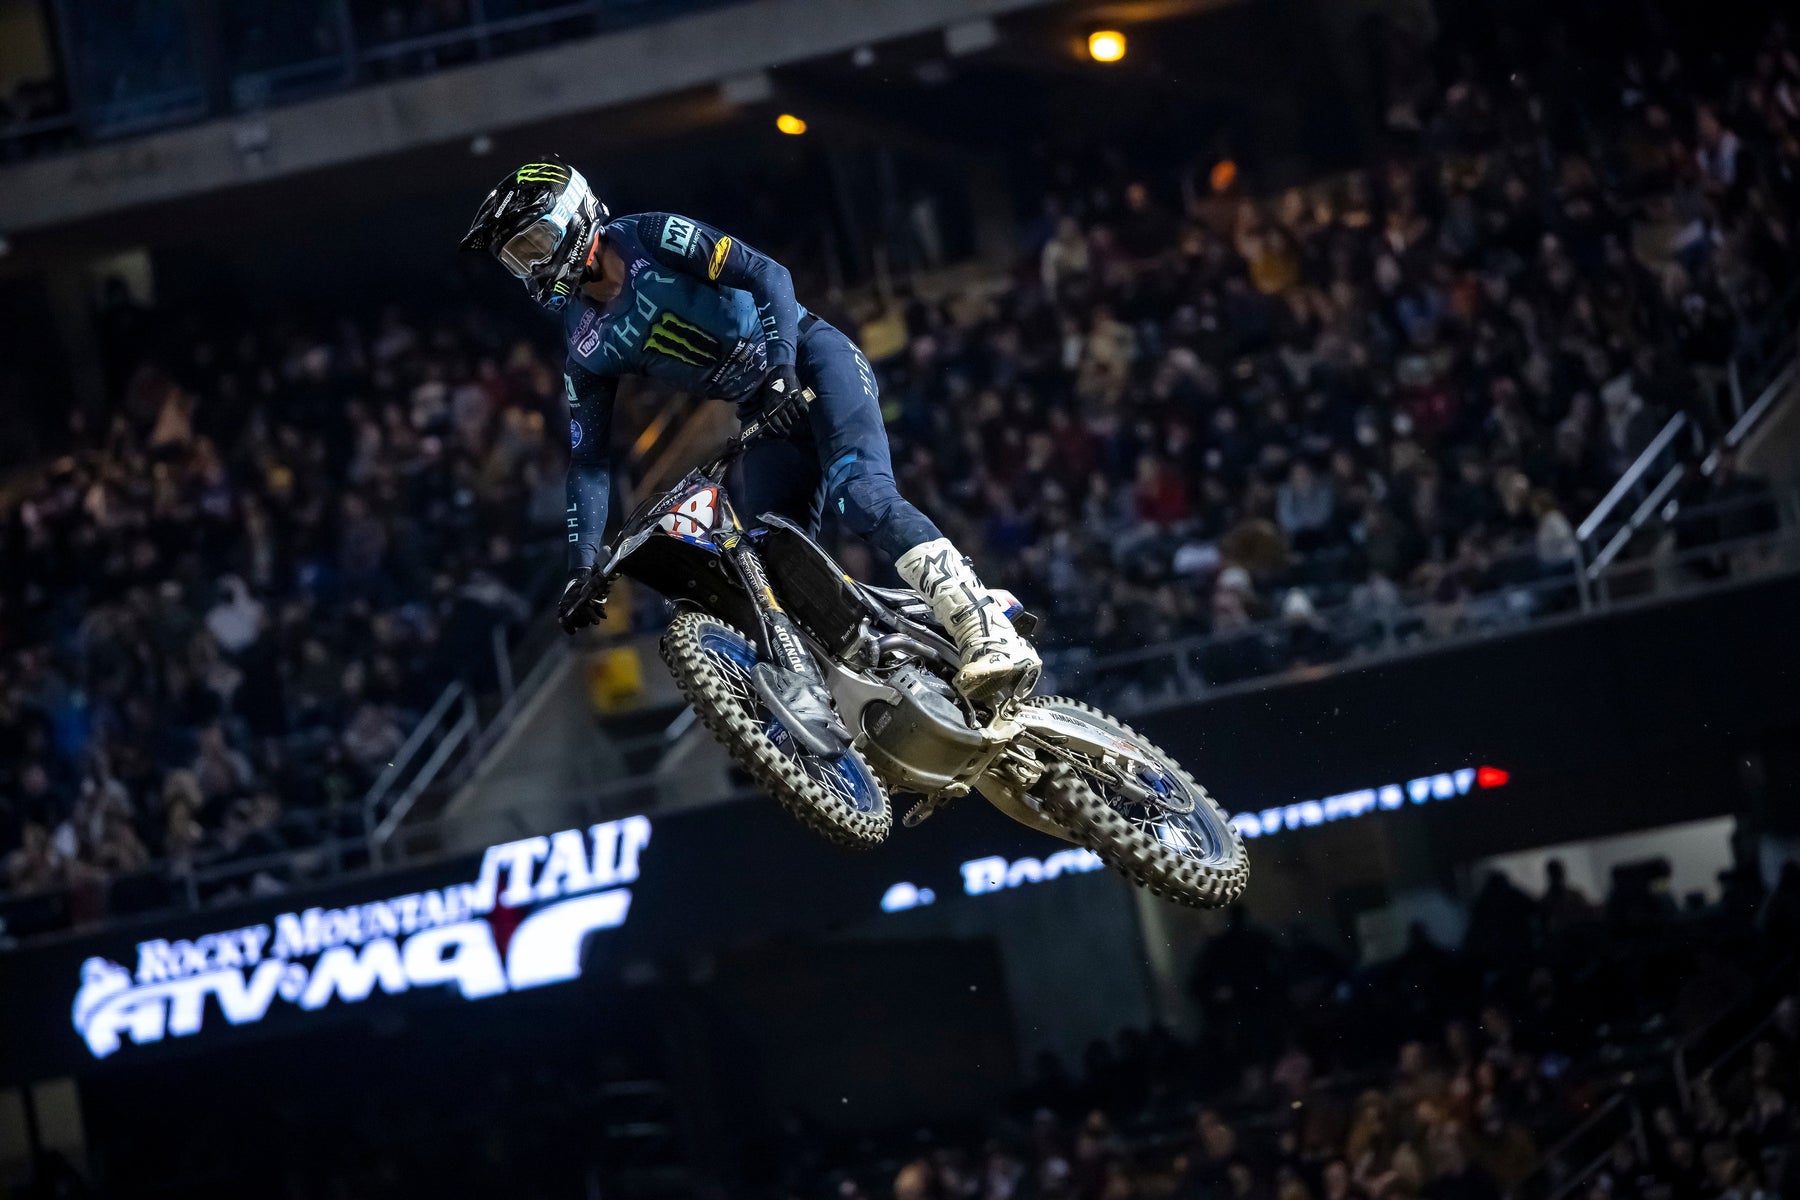 DOMINANT CHRISTIAN CRAIG EDGES HUNTER LAWRENCE TO 250SX WEST SUCCESS IN OAKLAND